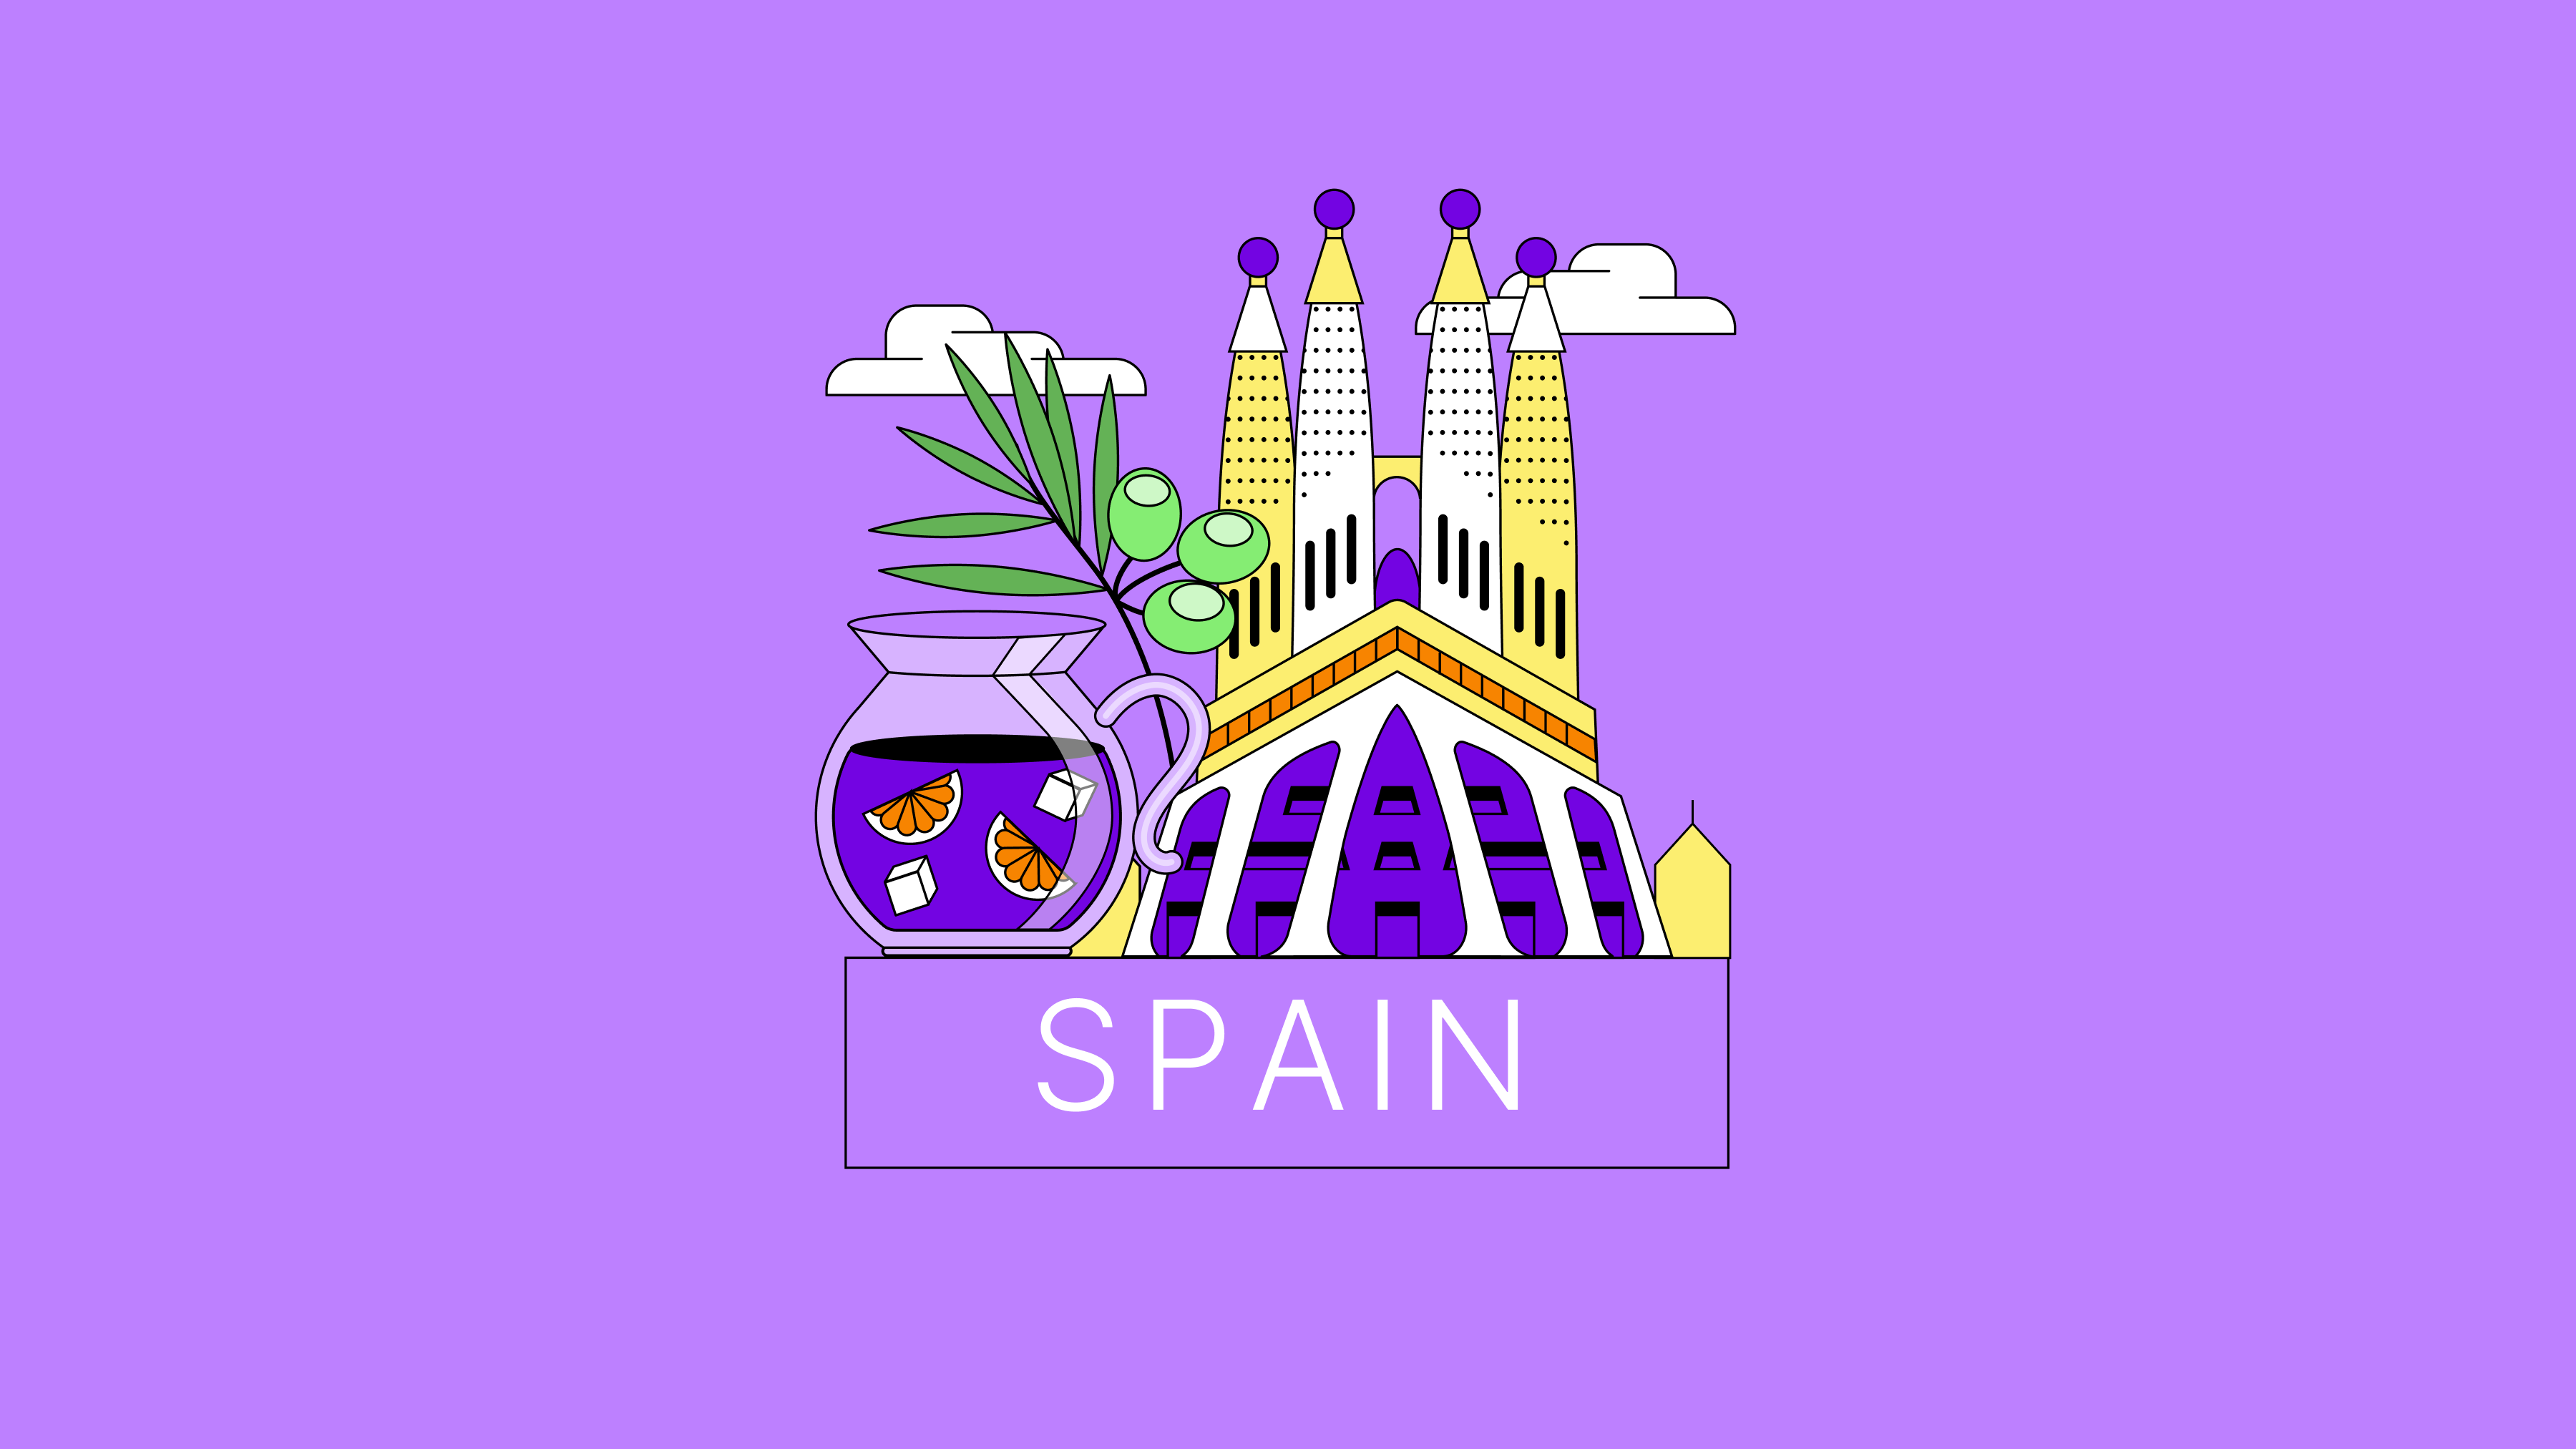 Moving to Spain: A Guide for Expats and Digital Nomads